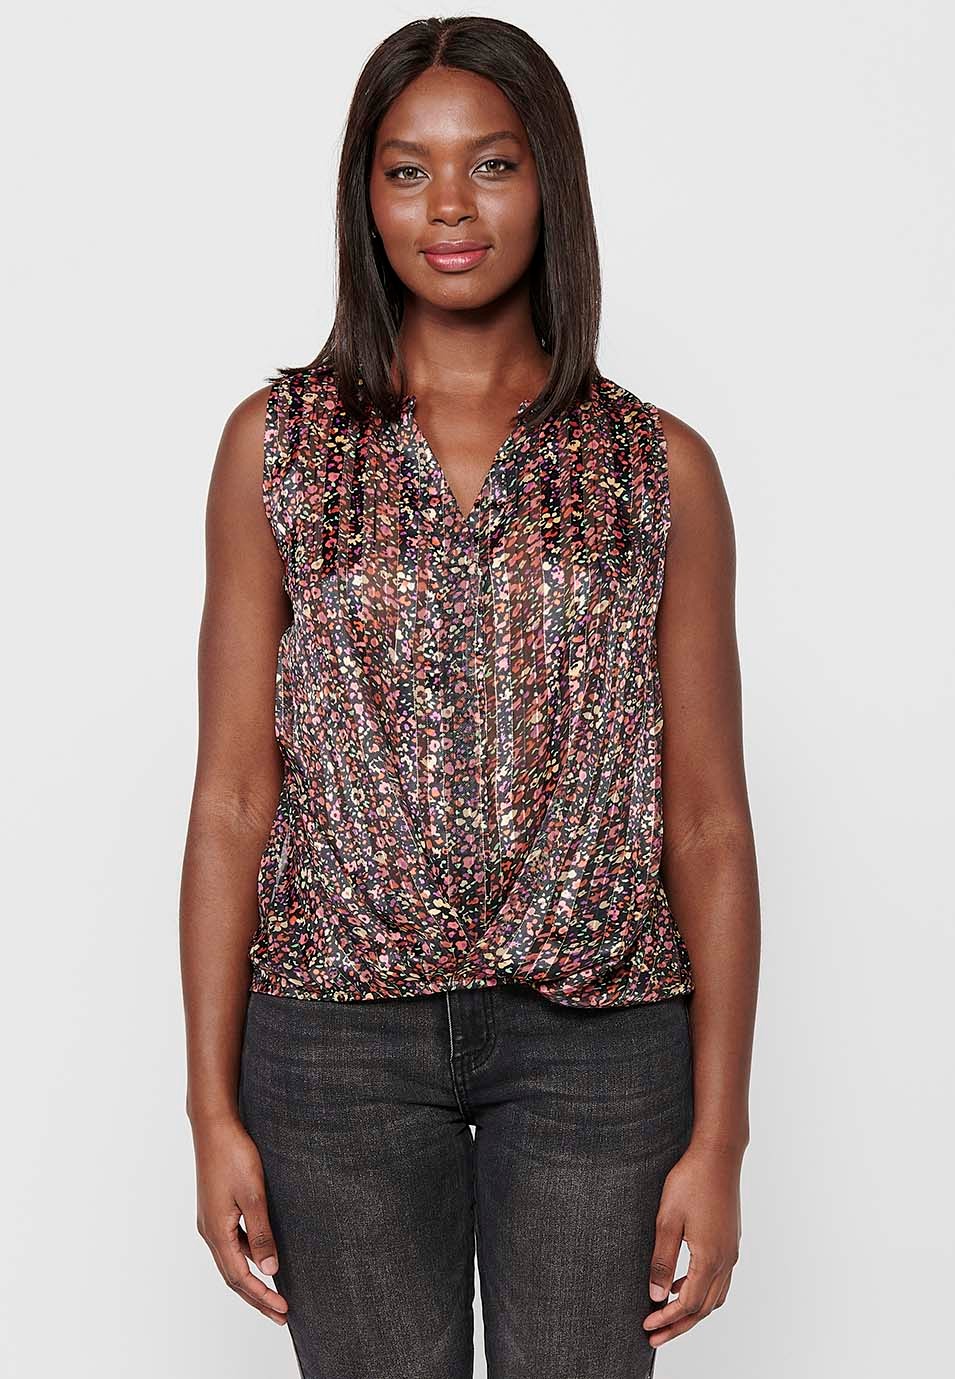 Loose Sleeveless V-Neck Blouse with Front Detail and Multicolor Striped Floral Print for Women